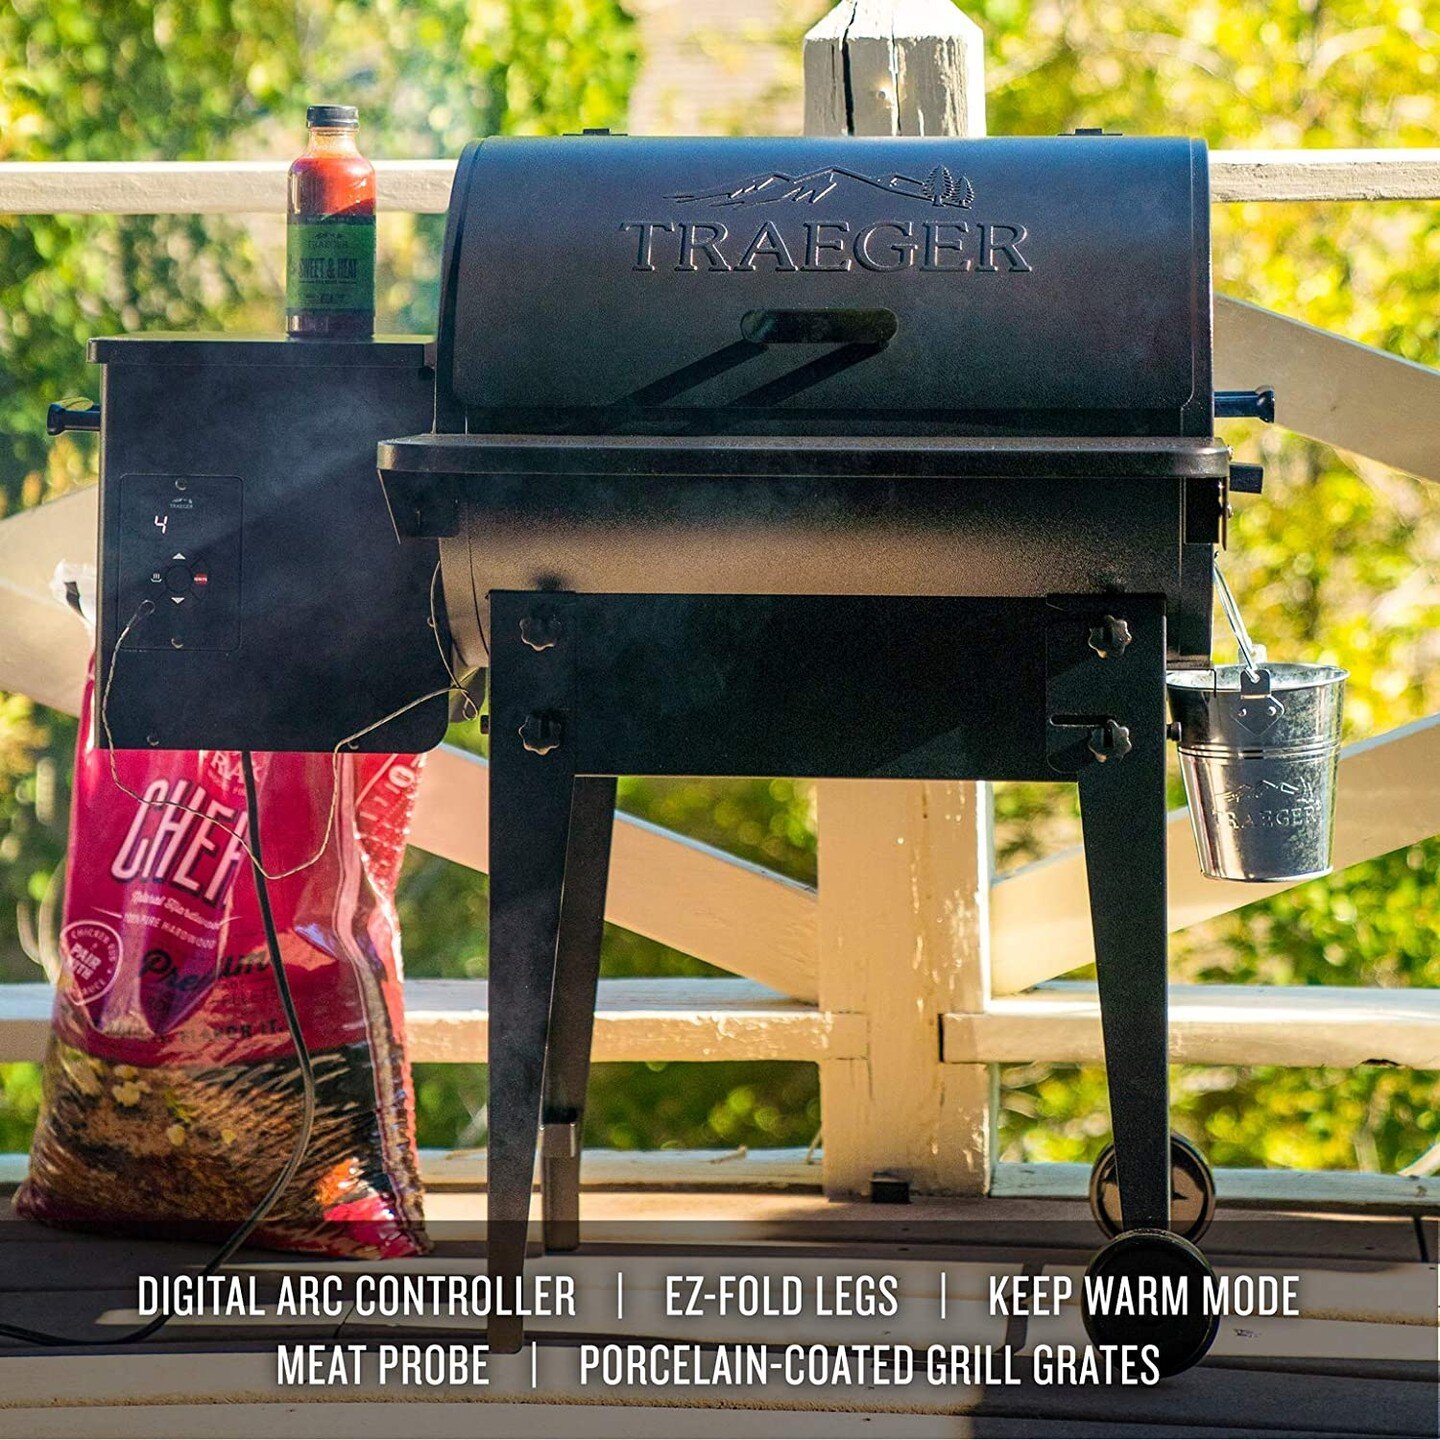 We are getting so close to the big day! Our upcoming Traeger Tasting event on Aug 19th features the opportunity to win the grand prize draw of a Traeger &ldquo;Tailgater&rdquo; Grill. Kindly supplied by @vintage_stove. We want you to have the opportu